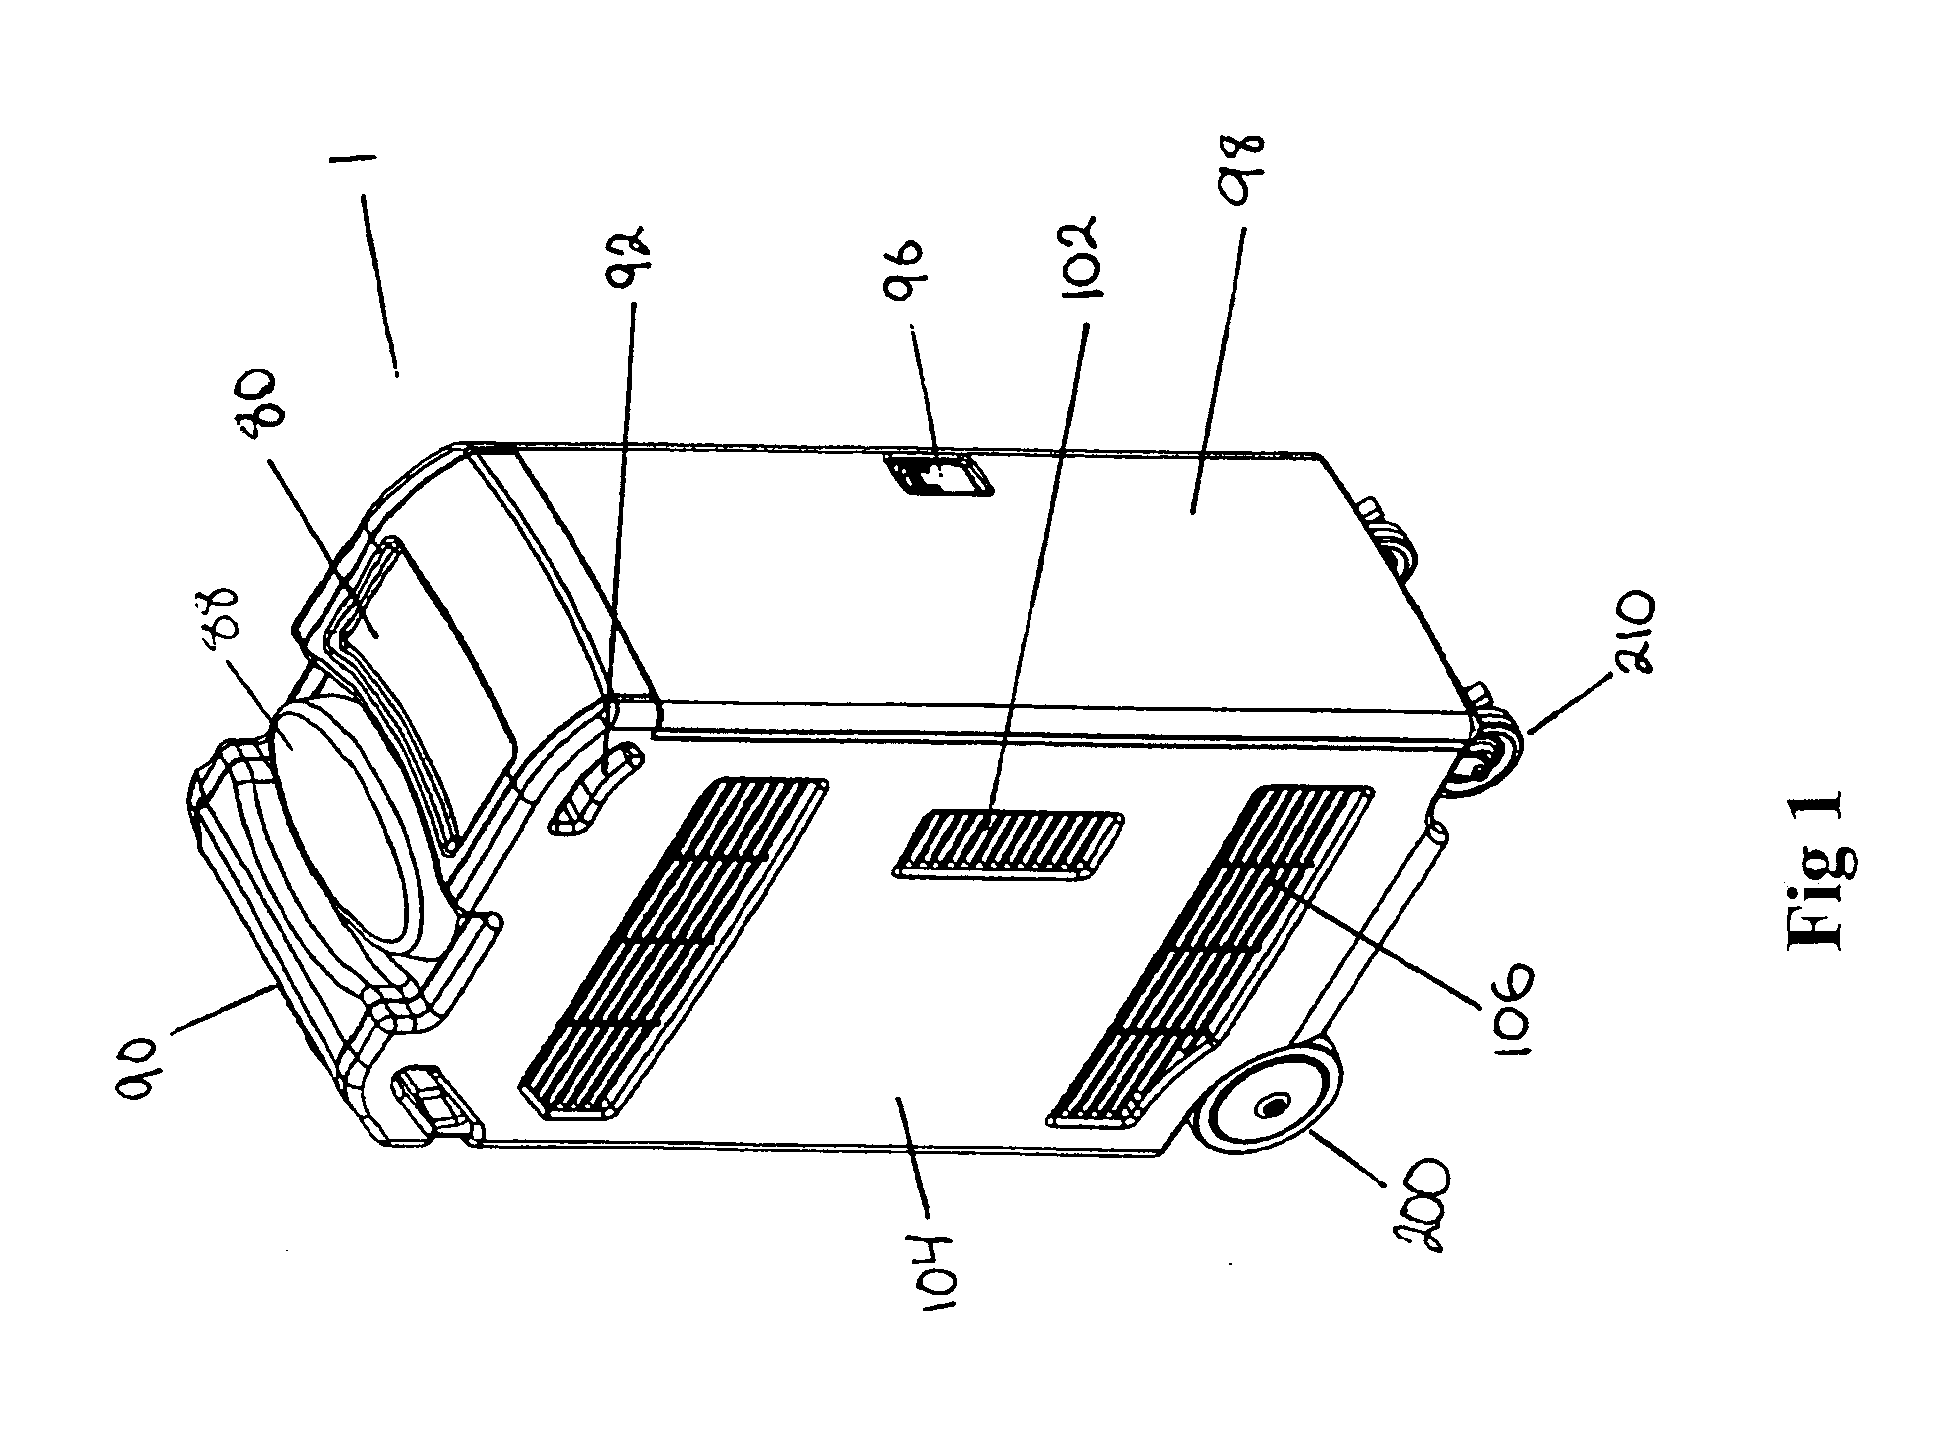 Apparatus and method for using ozone as a disinfectant